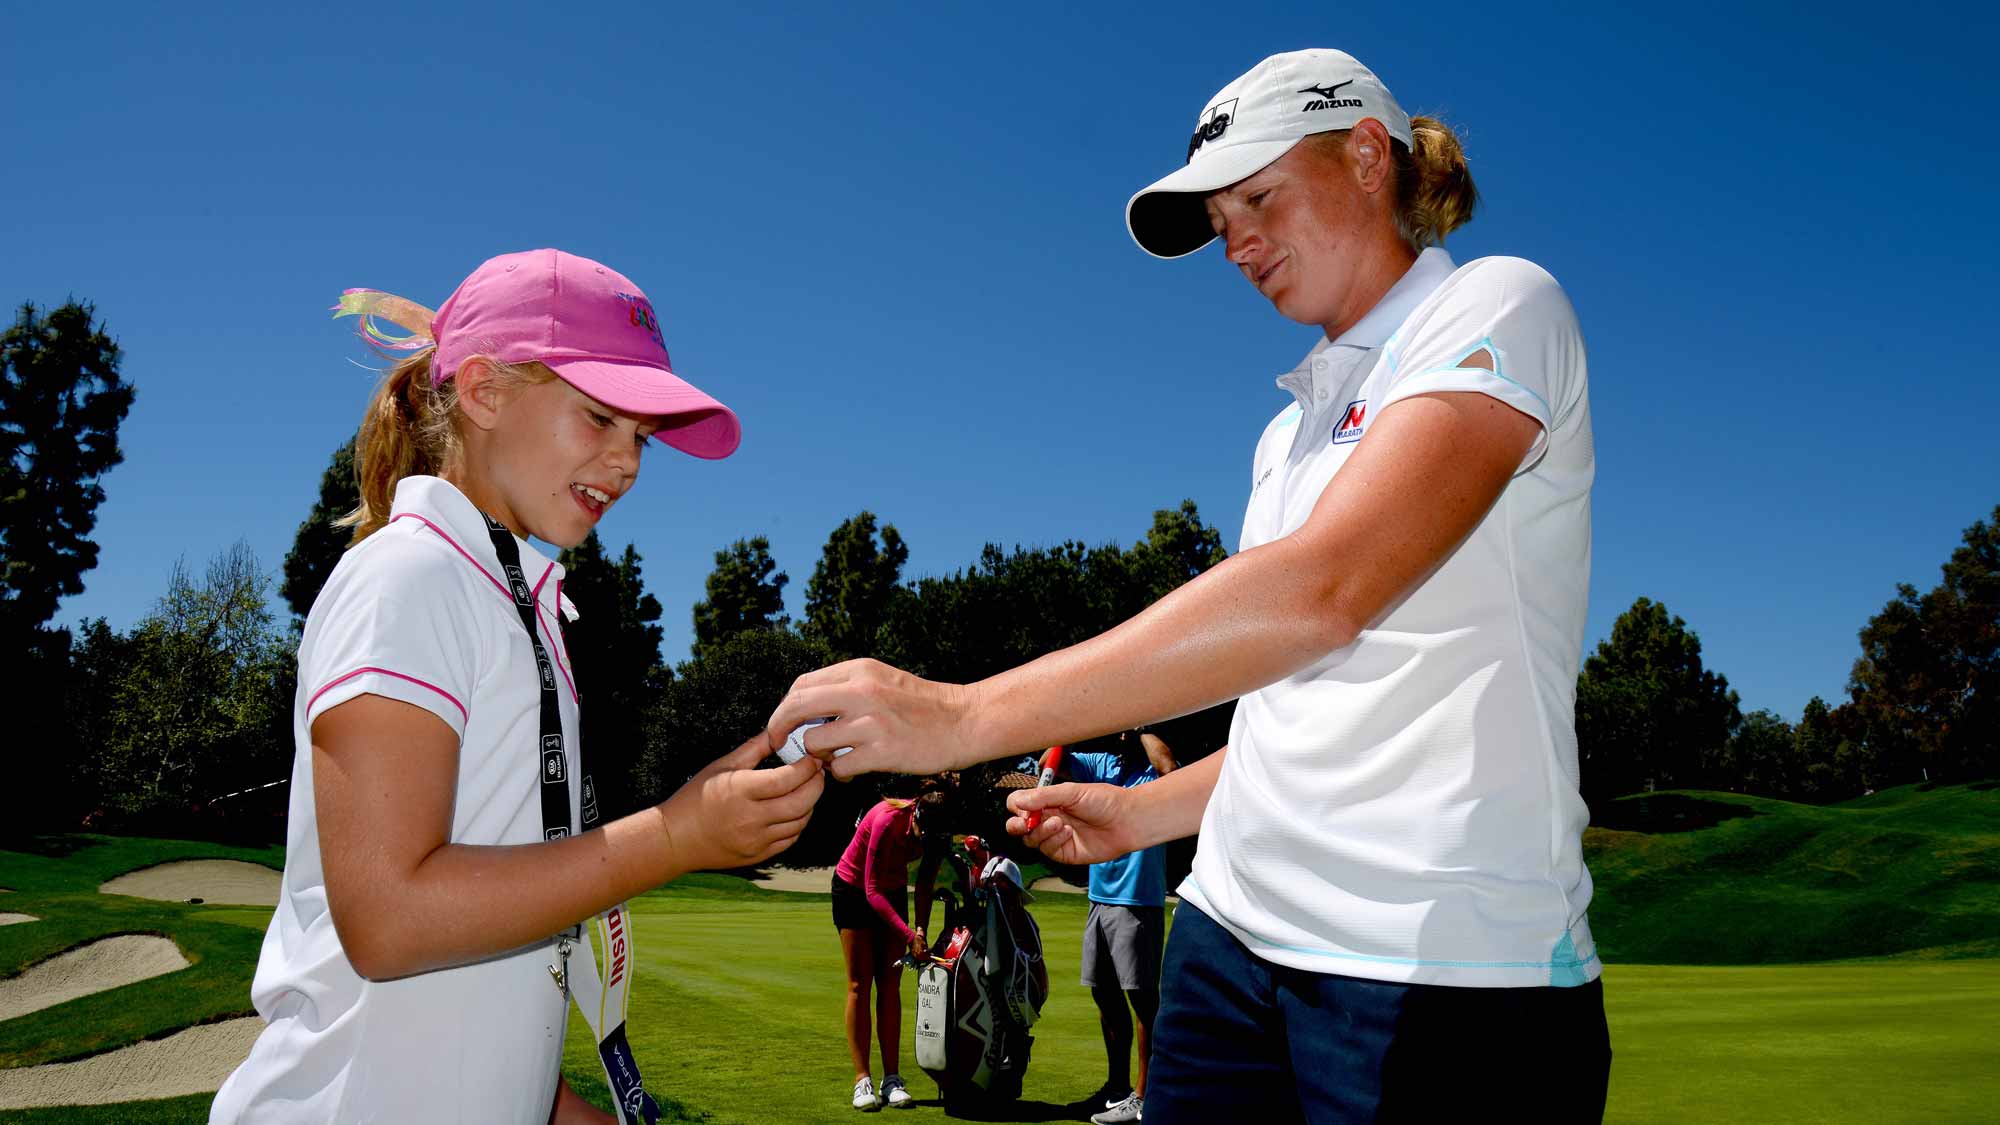 Stacy Lewis signs a ball for a fan during Round Two of the LPGA KIA Classic at the Aviara Golf Club